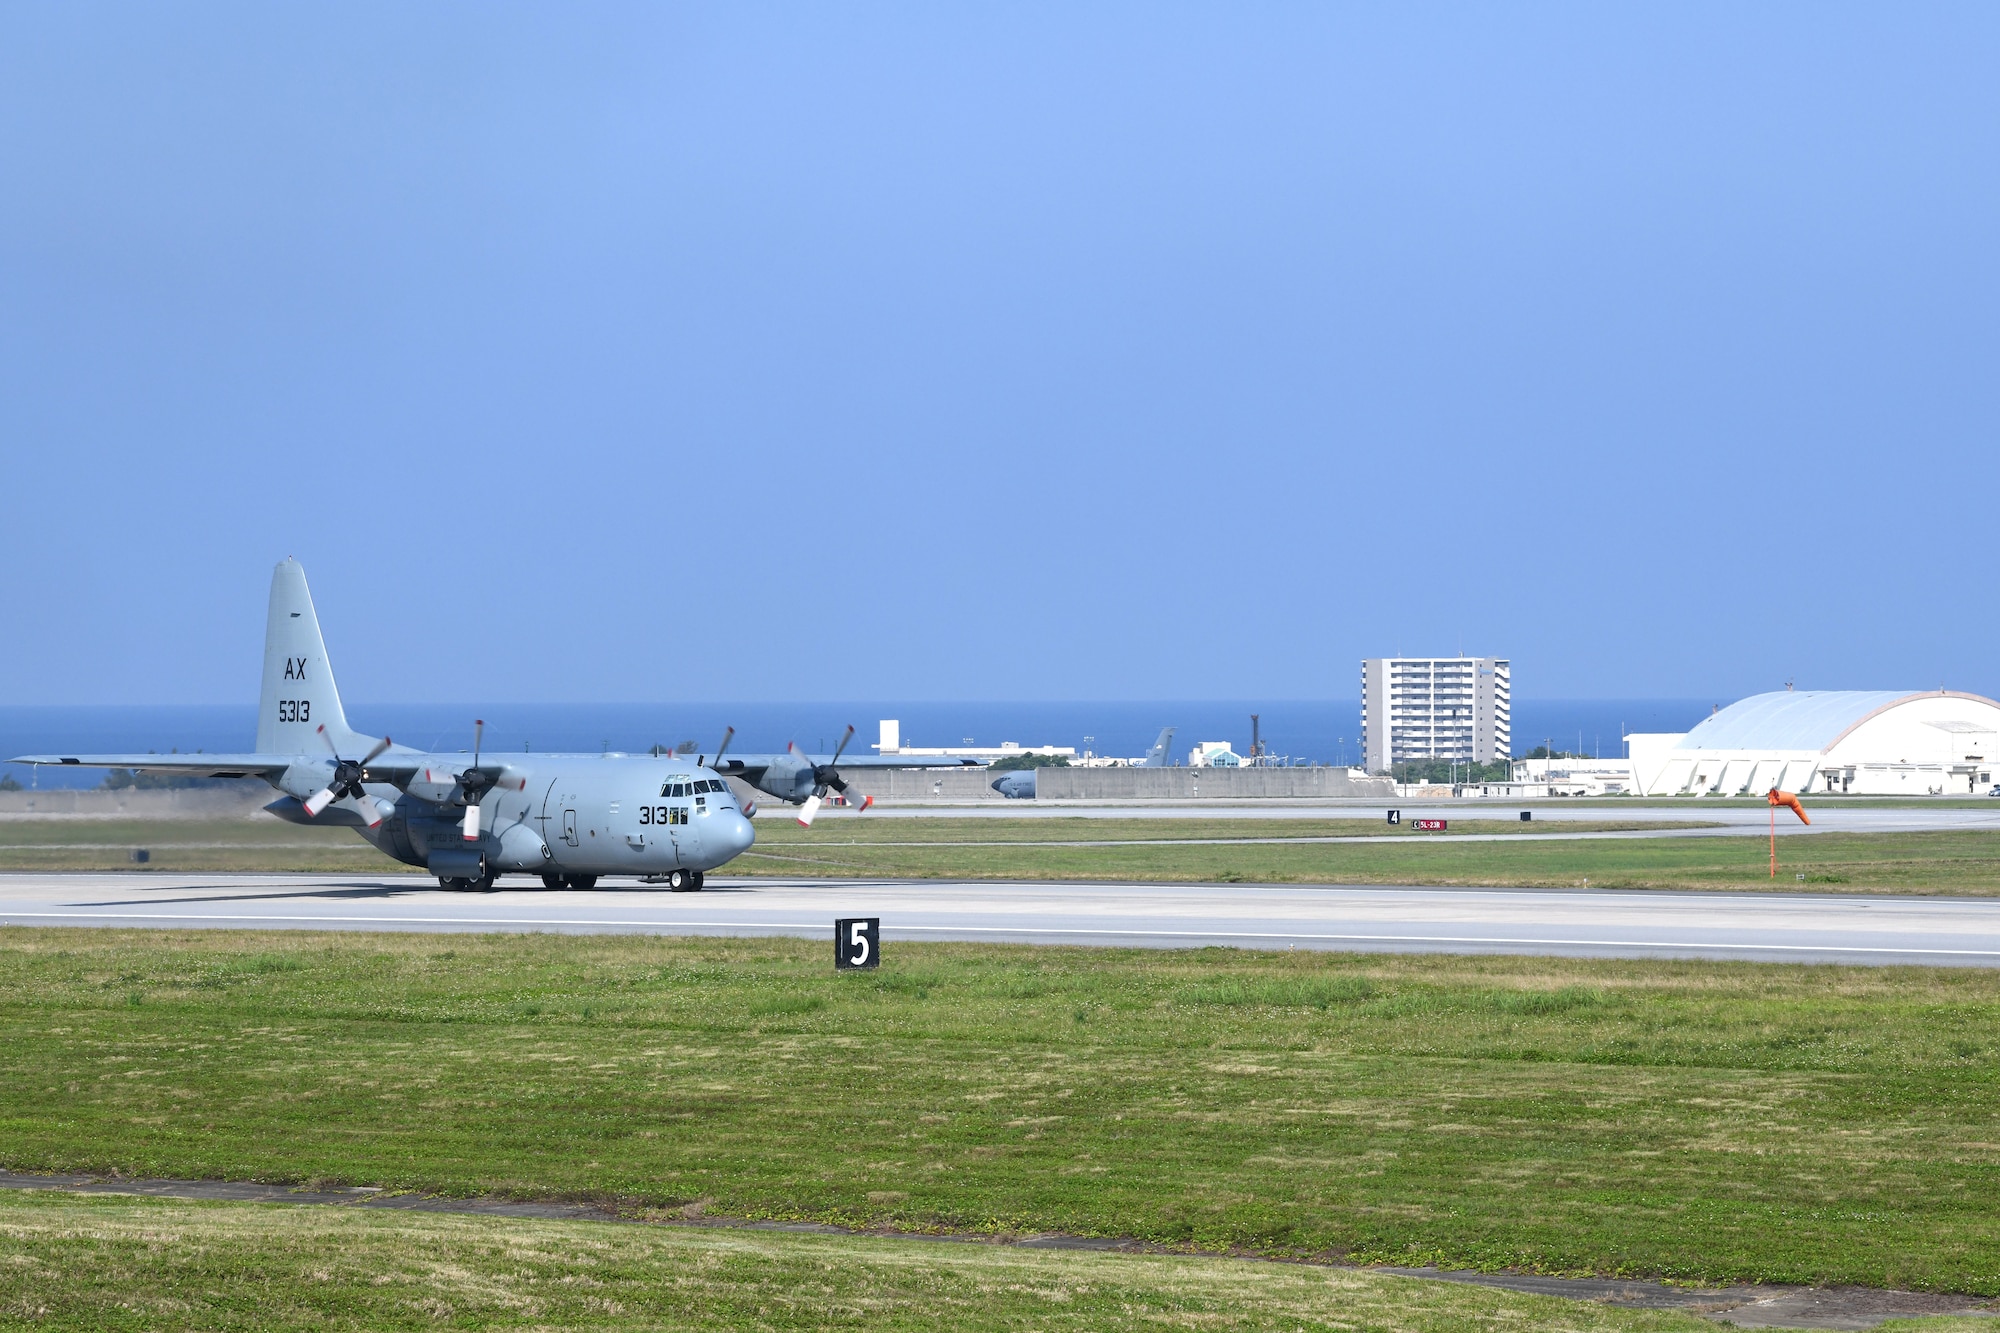 A U.S. Air Force MC-130J Commando II, assigned to the 17th Special Operations Squadron, taxis down the flight line on Kadena Air Base, Japan, on April 17, 2020. Team Kadena is postured to protect its forces against COVID-19 while also maintaining mission readiness in support of the U.S.-Japan Alliance. (U.S. Air Force photo by Airman 1st Class Rebeckah Medeiros)